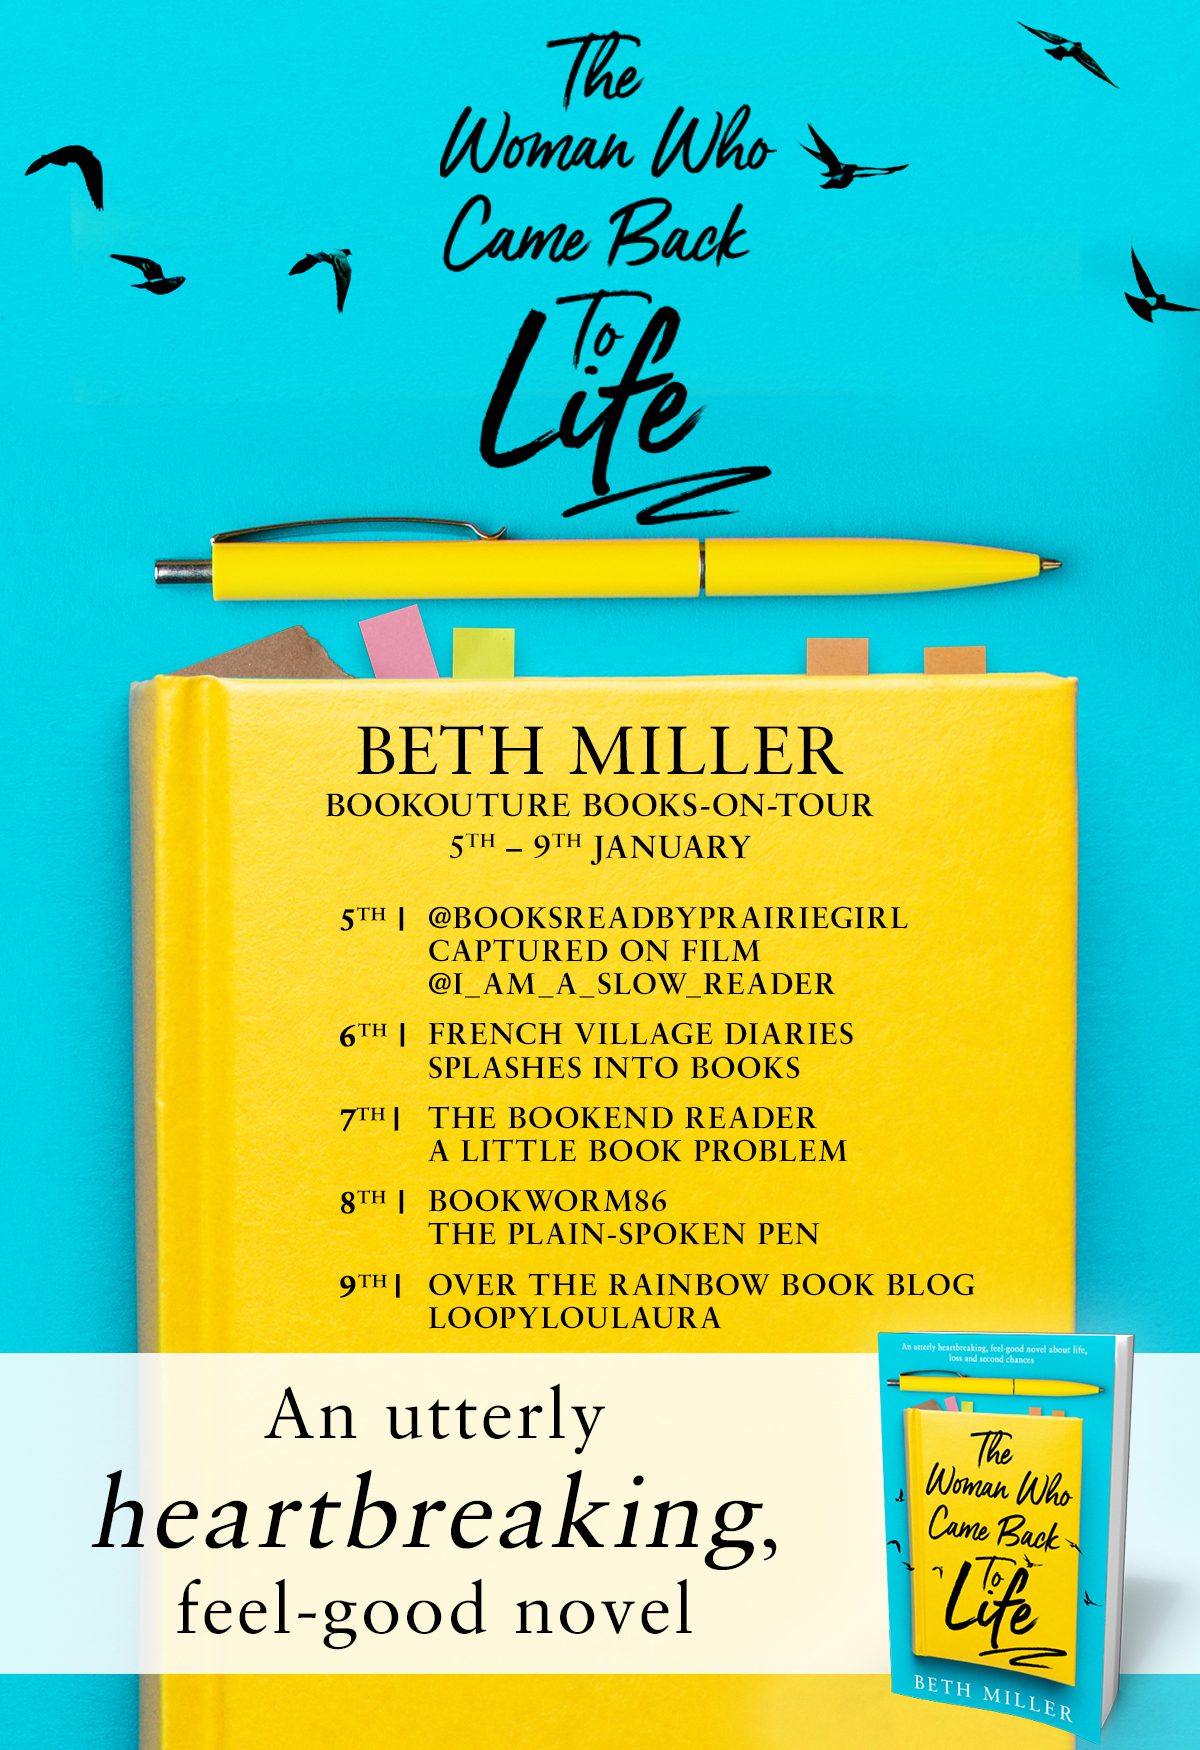 The Woman Who Came Back To Life blog tour banner